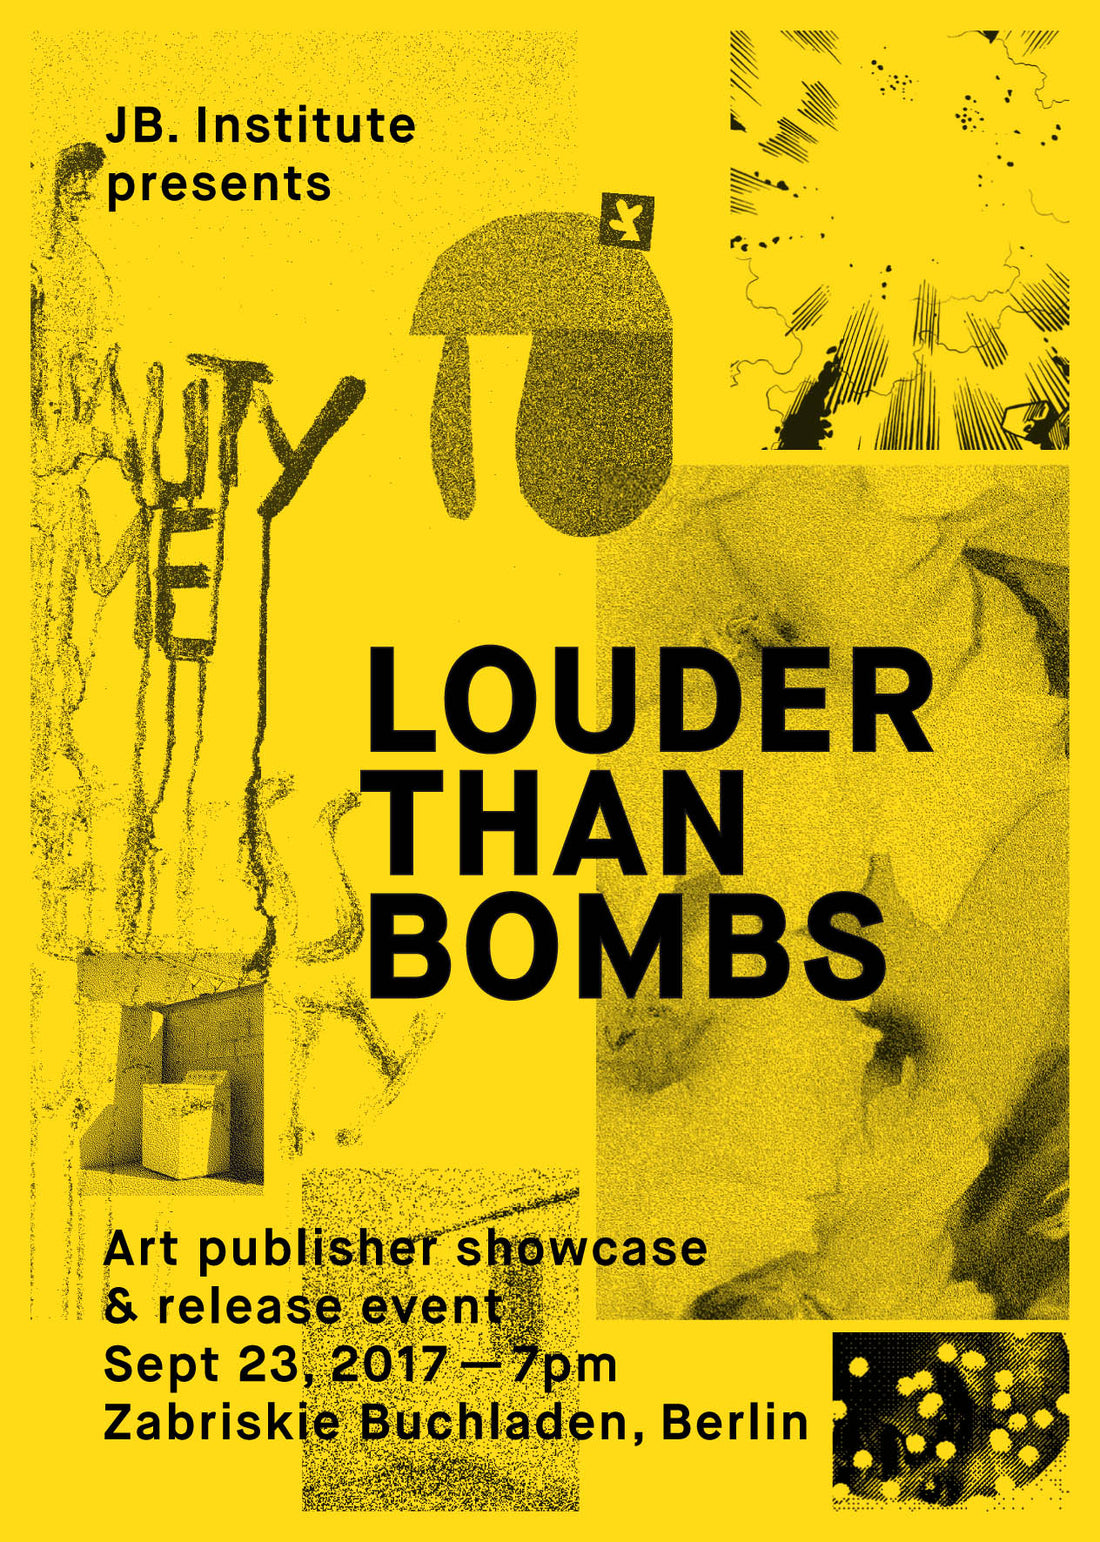 Release Event - JB. Institute presents "Louder Than Bombs"